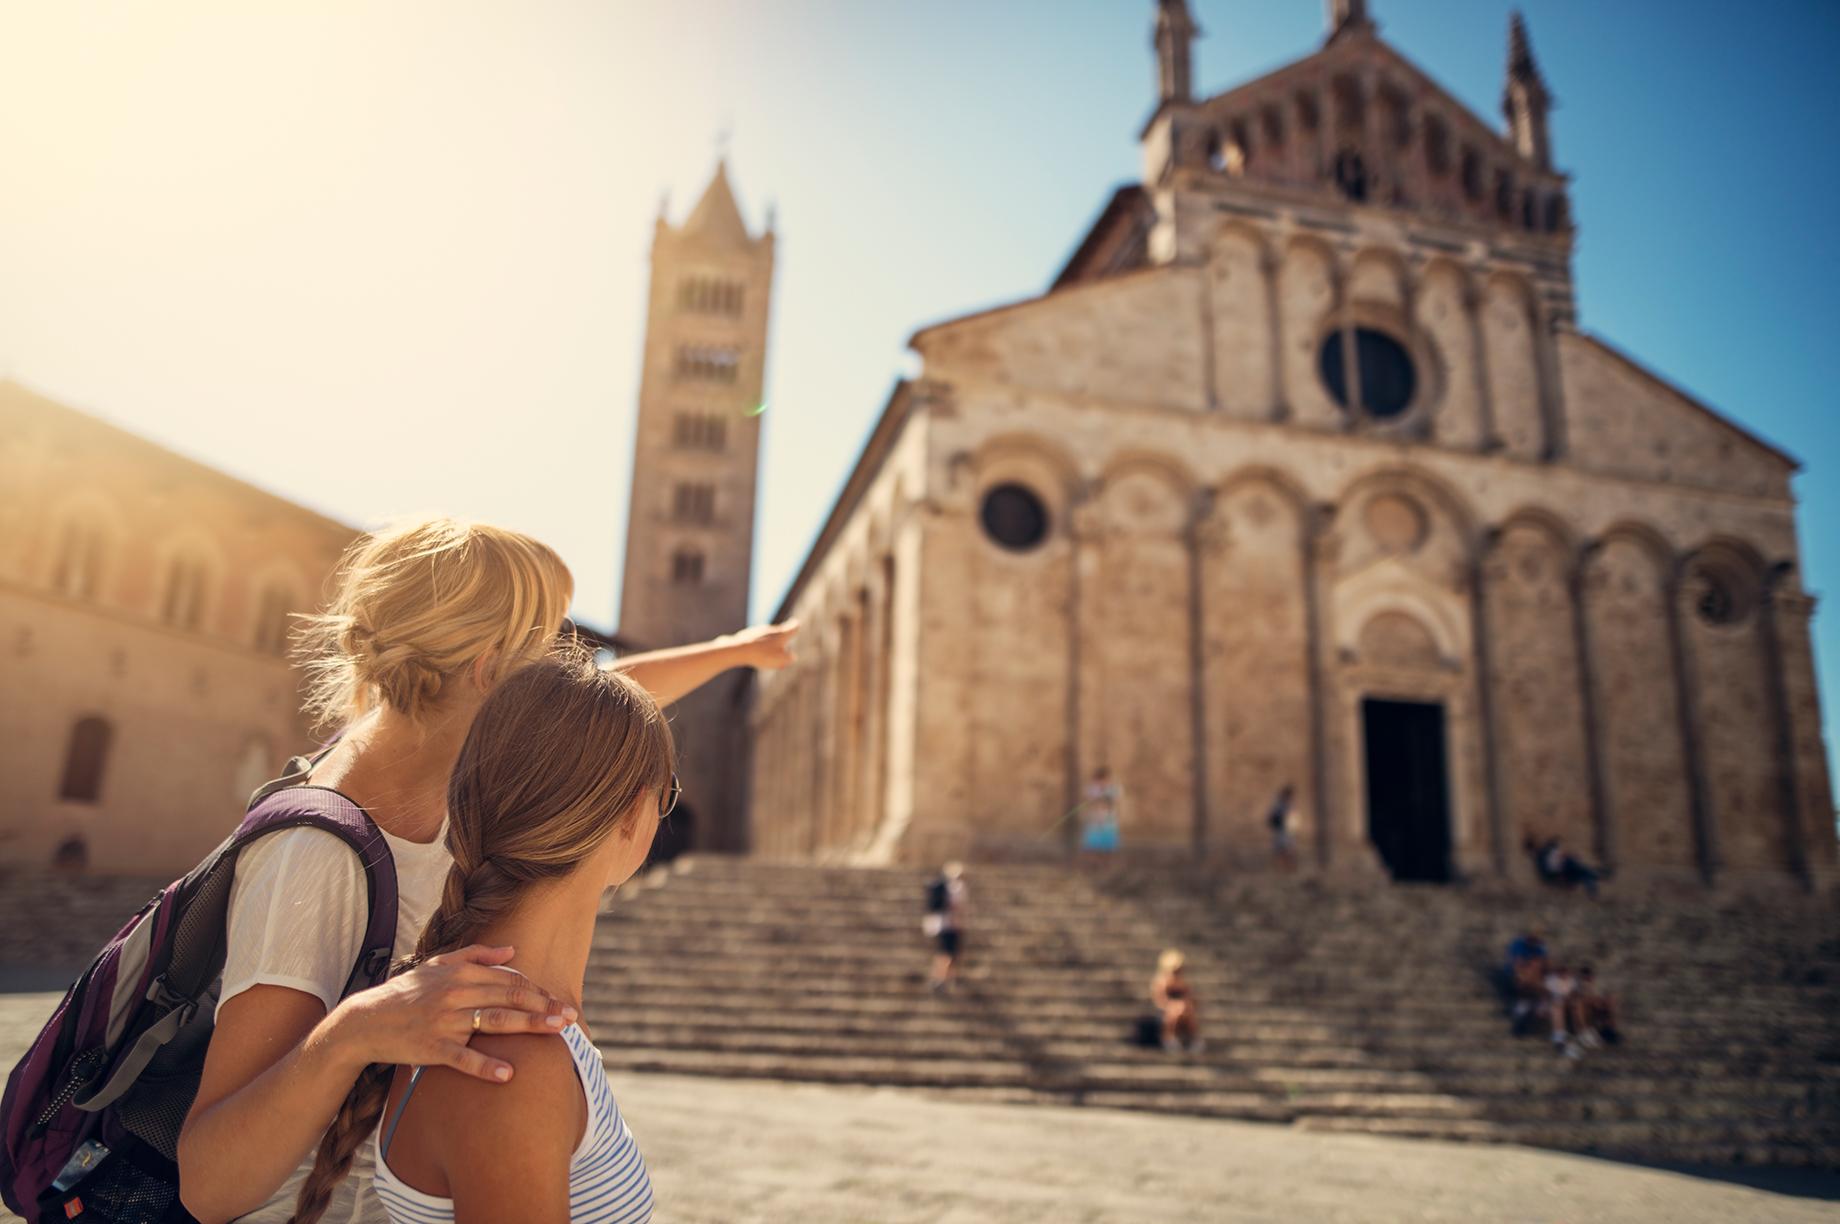 Take a Liberty Travel Guided tour and see the world in the best way: through your own eyes